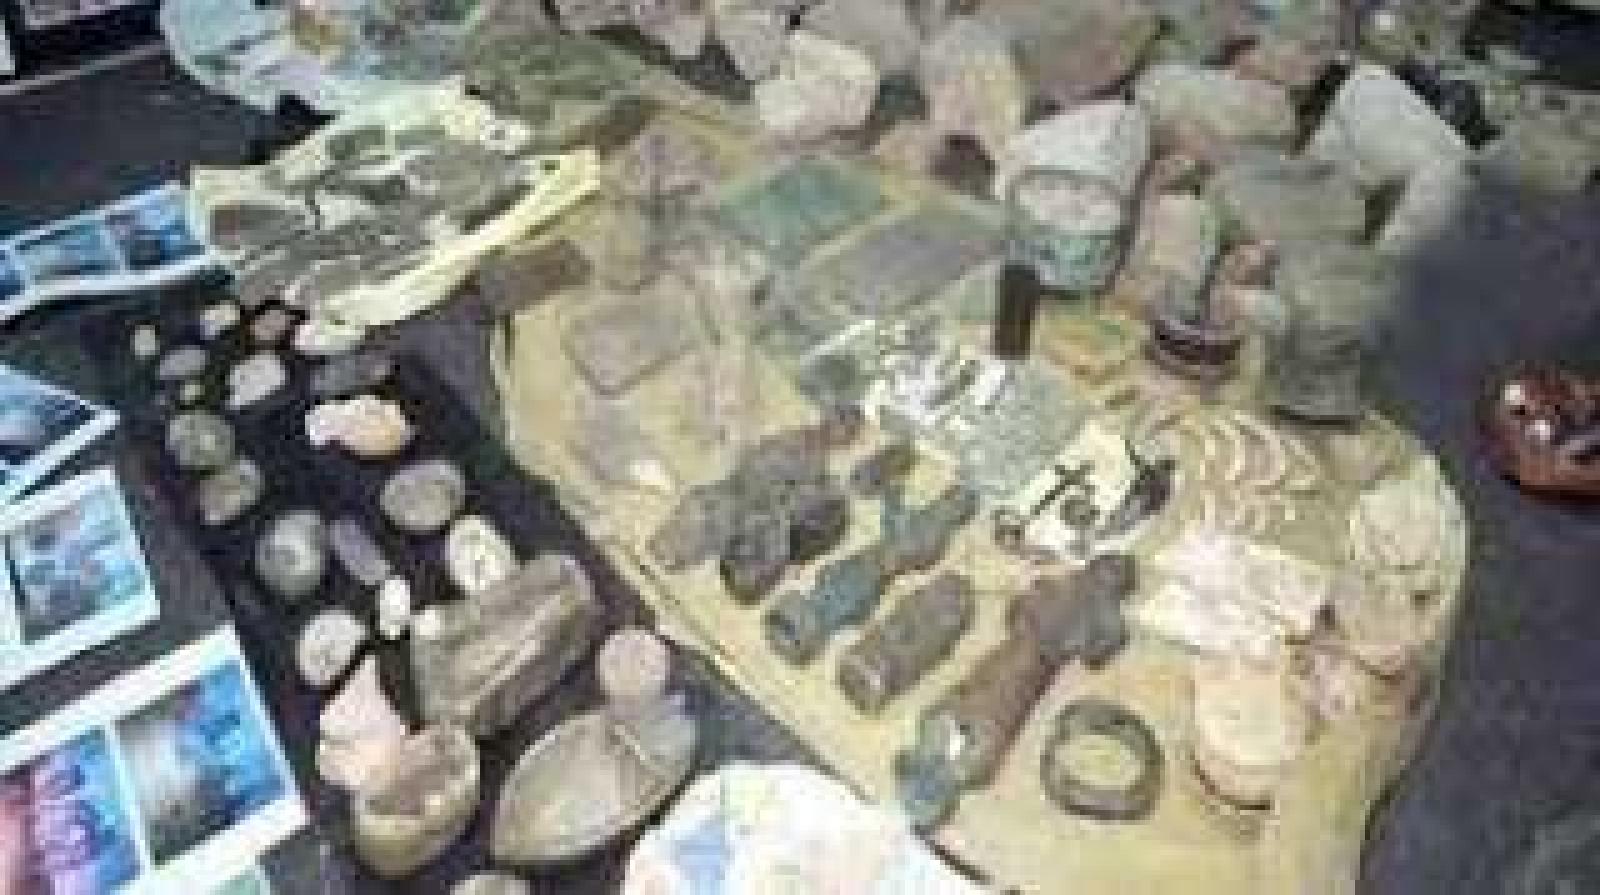 Finds and looted antiquities from Baynun Museum in Dhamar, Arab Yemen Website, 6 February 2019